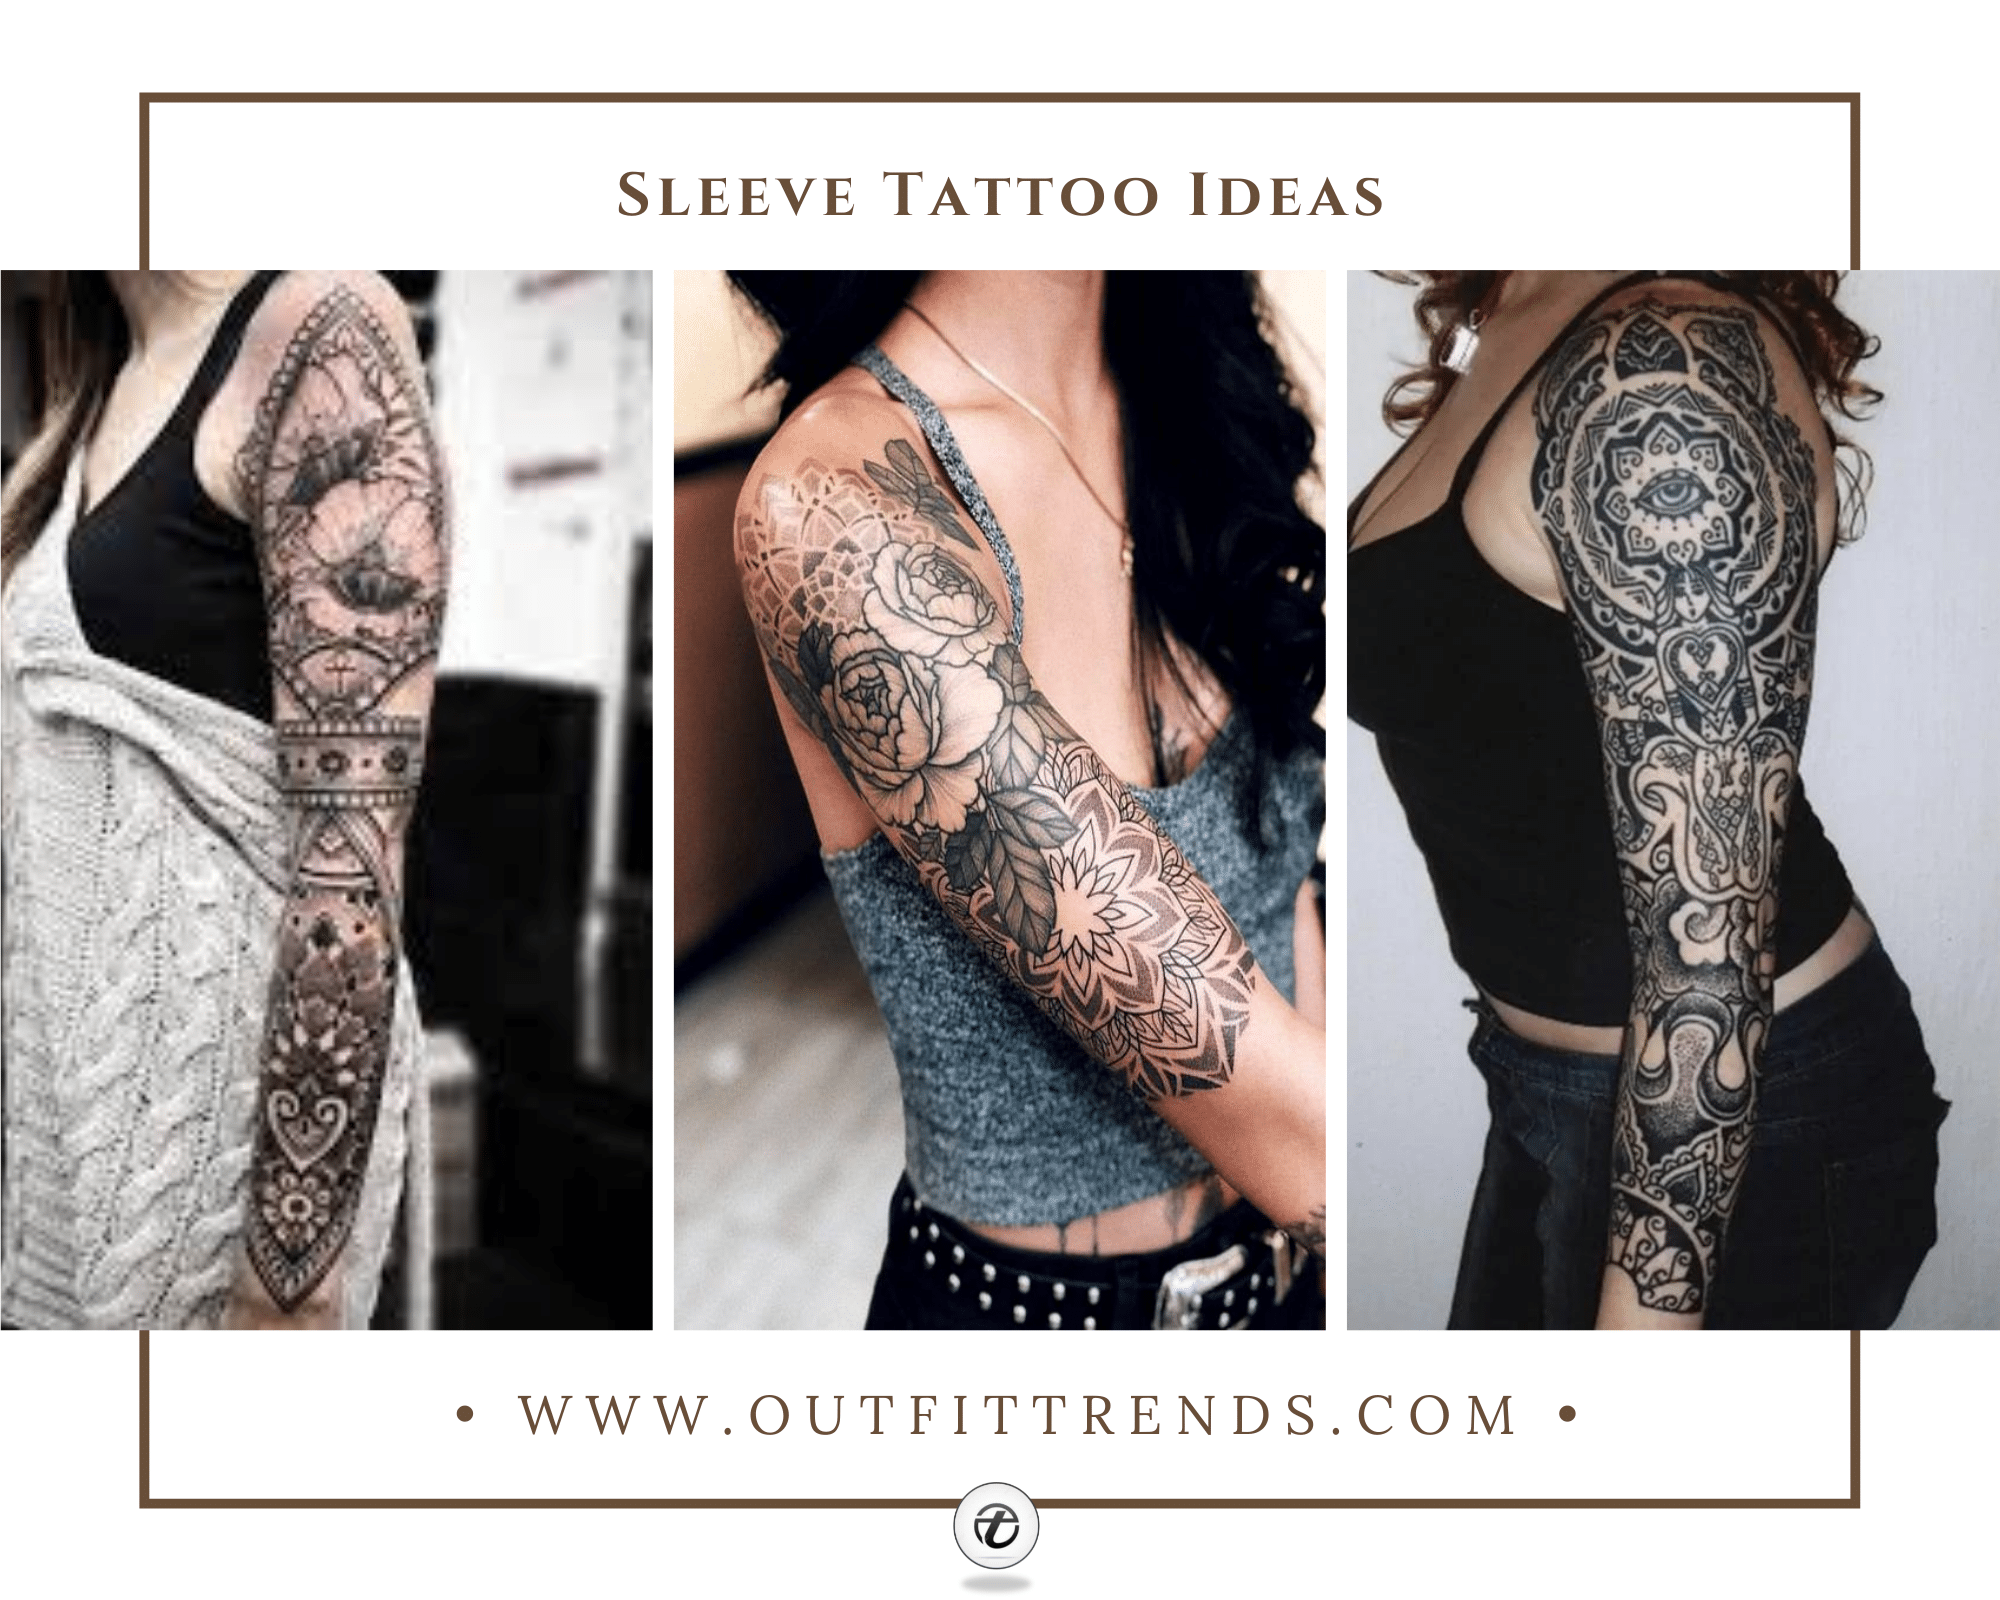 Full sleeve tattoo design needed within 34 days  Tattoo contest   99designs